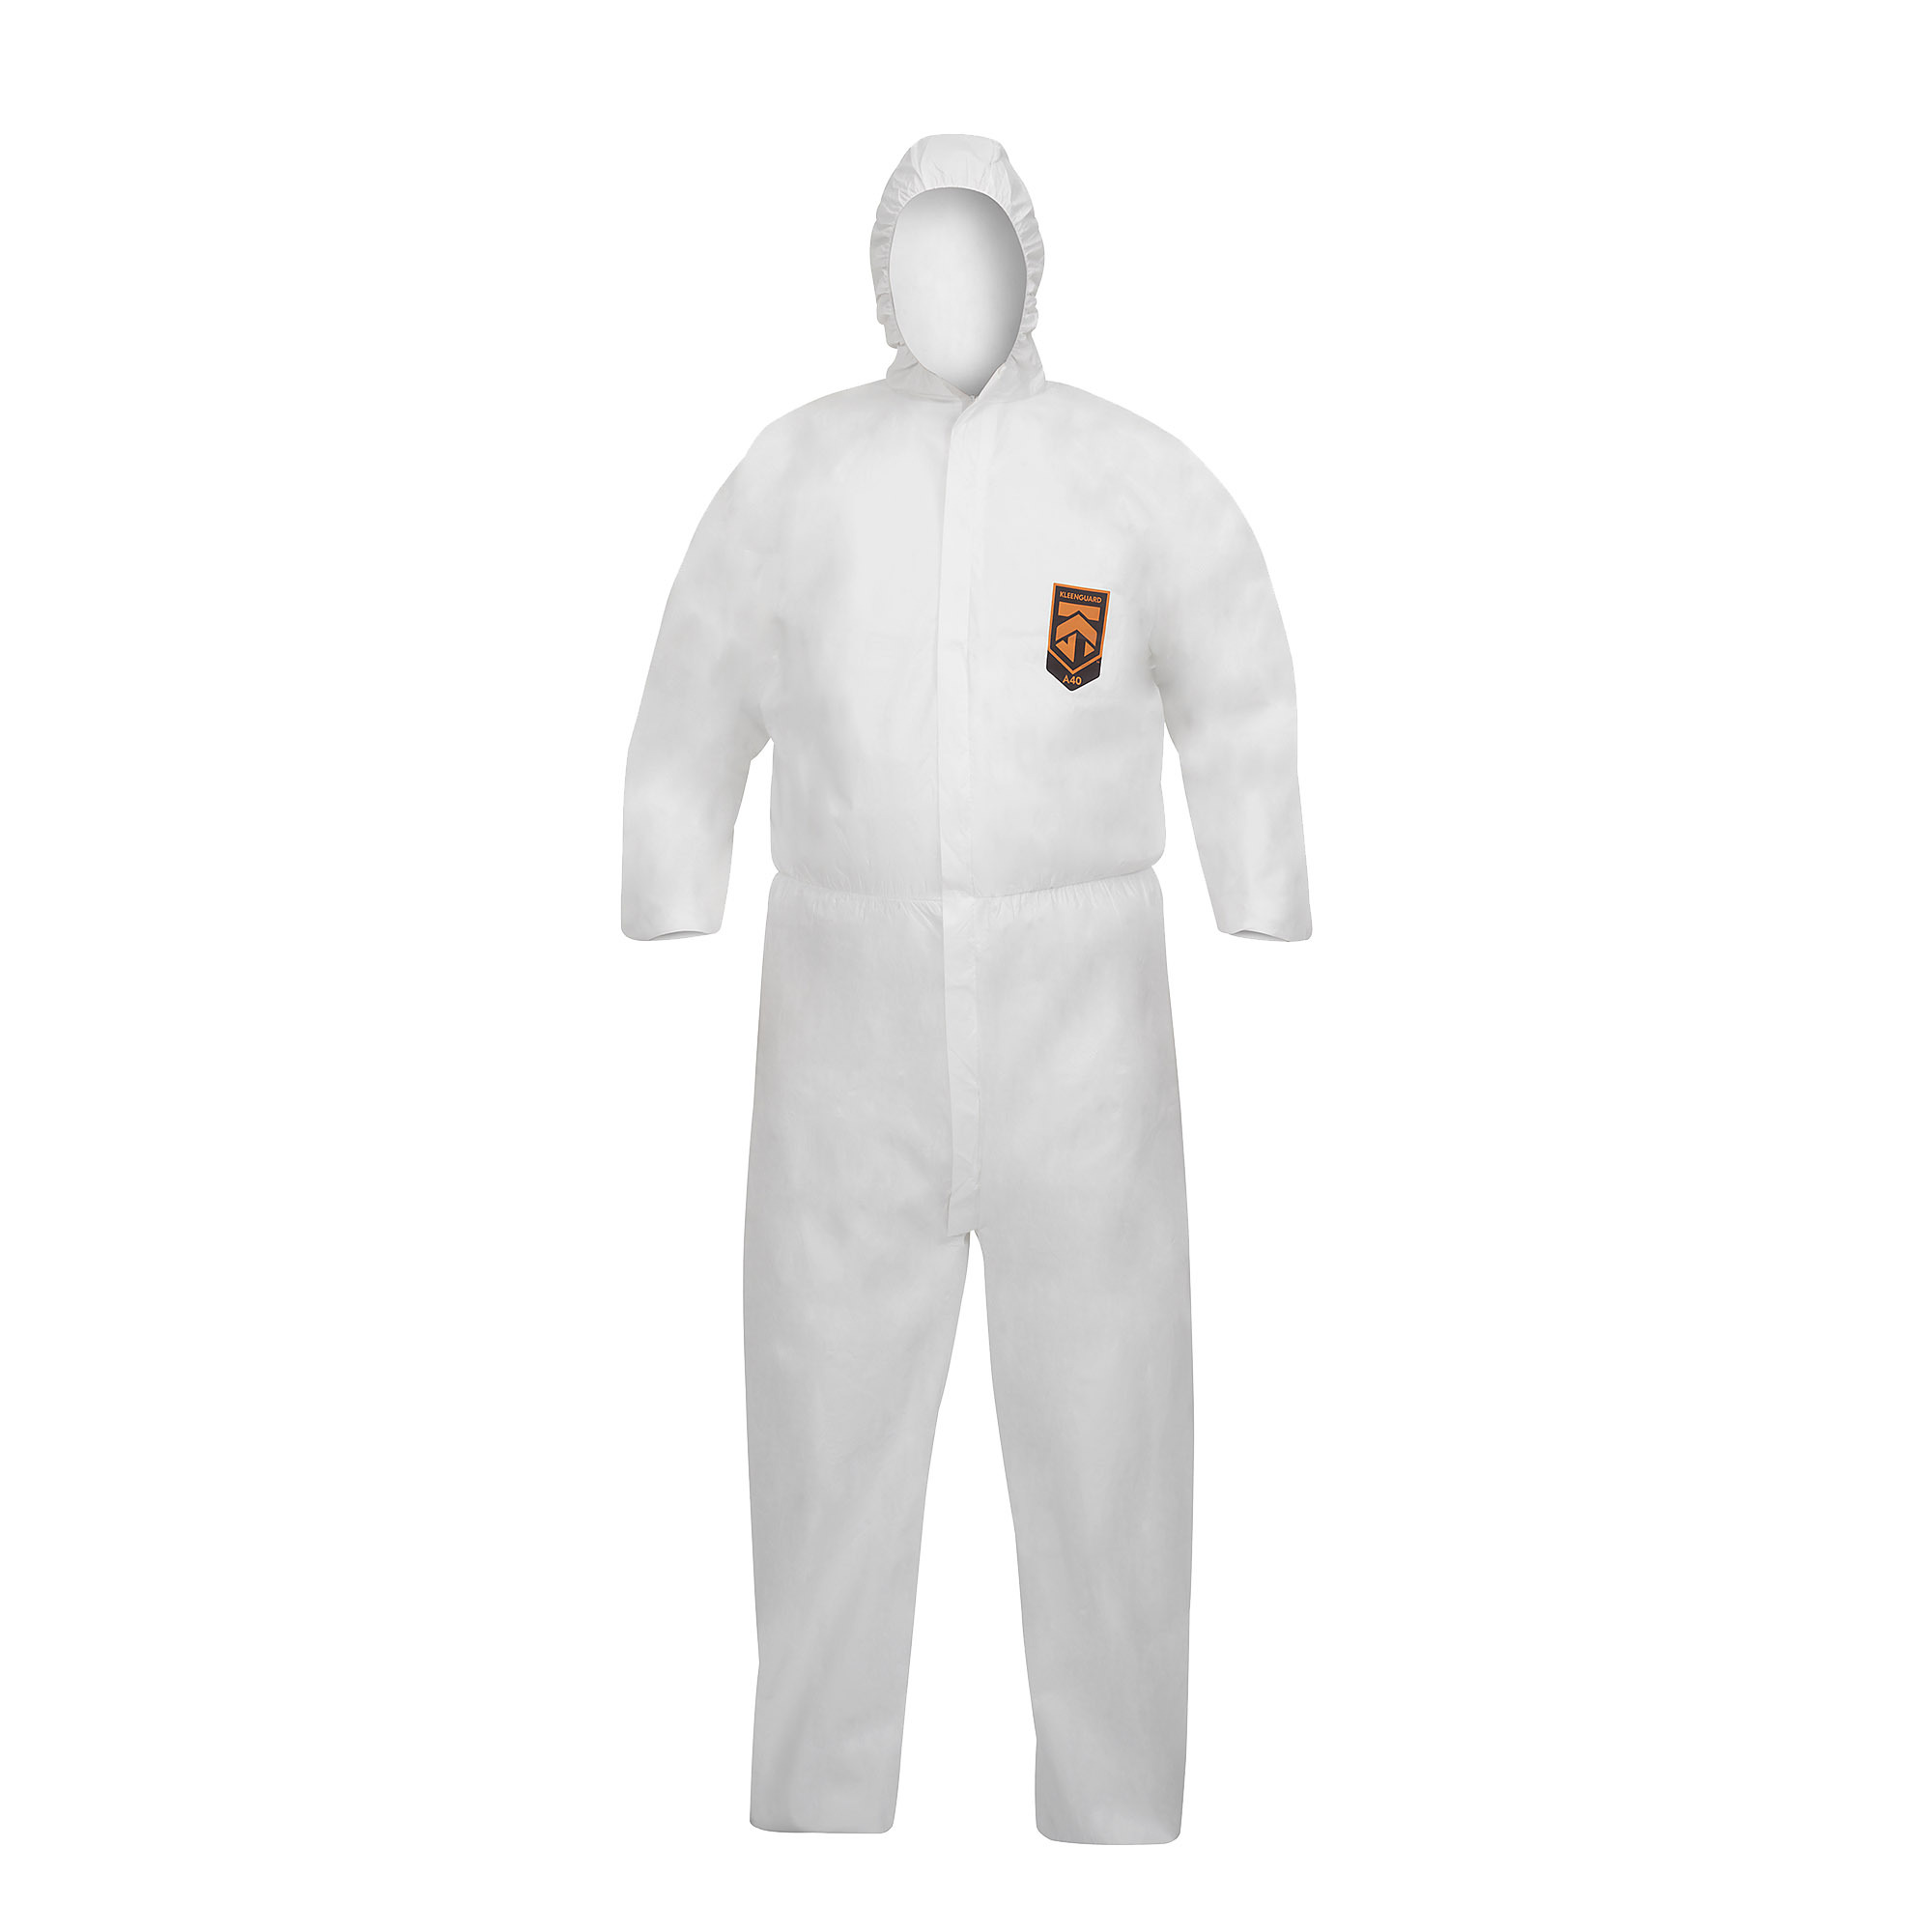 KleenGuard® A40 Liquid & Particle Protection Hooded Coveralls (97910), Medium White Coveralls, 25 Coveralls/Case, 1 Coverall / Pack (25 coveralls) - 97910